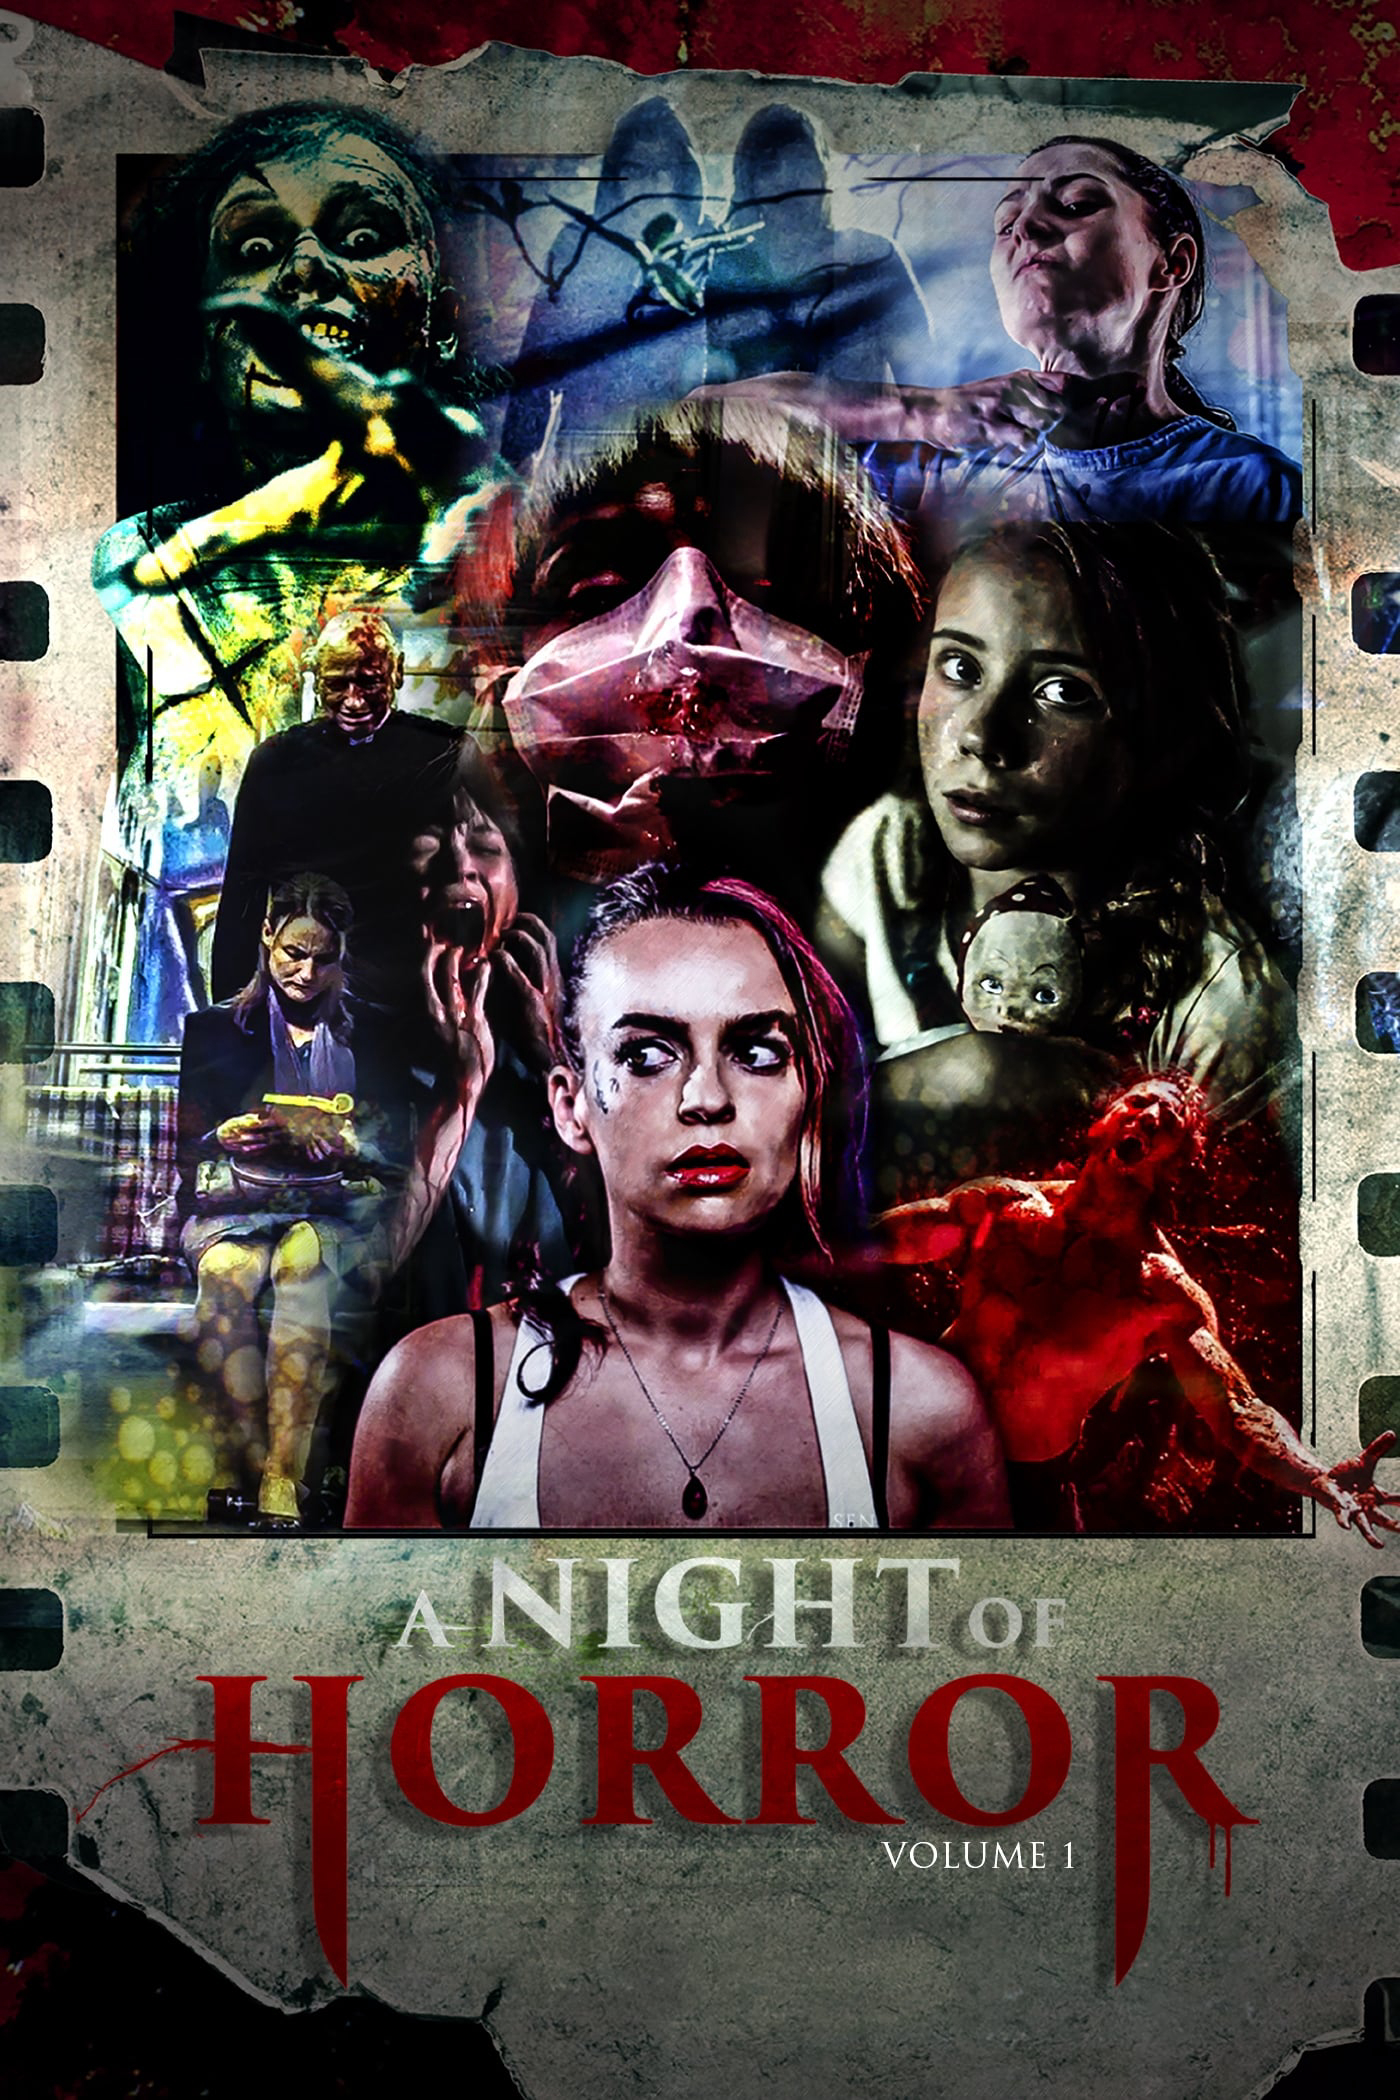 Poster Phim A Night of Horror Volume 1 (A Night of Horror Volume 1)